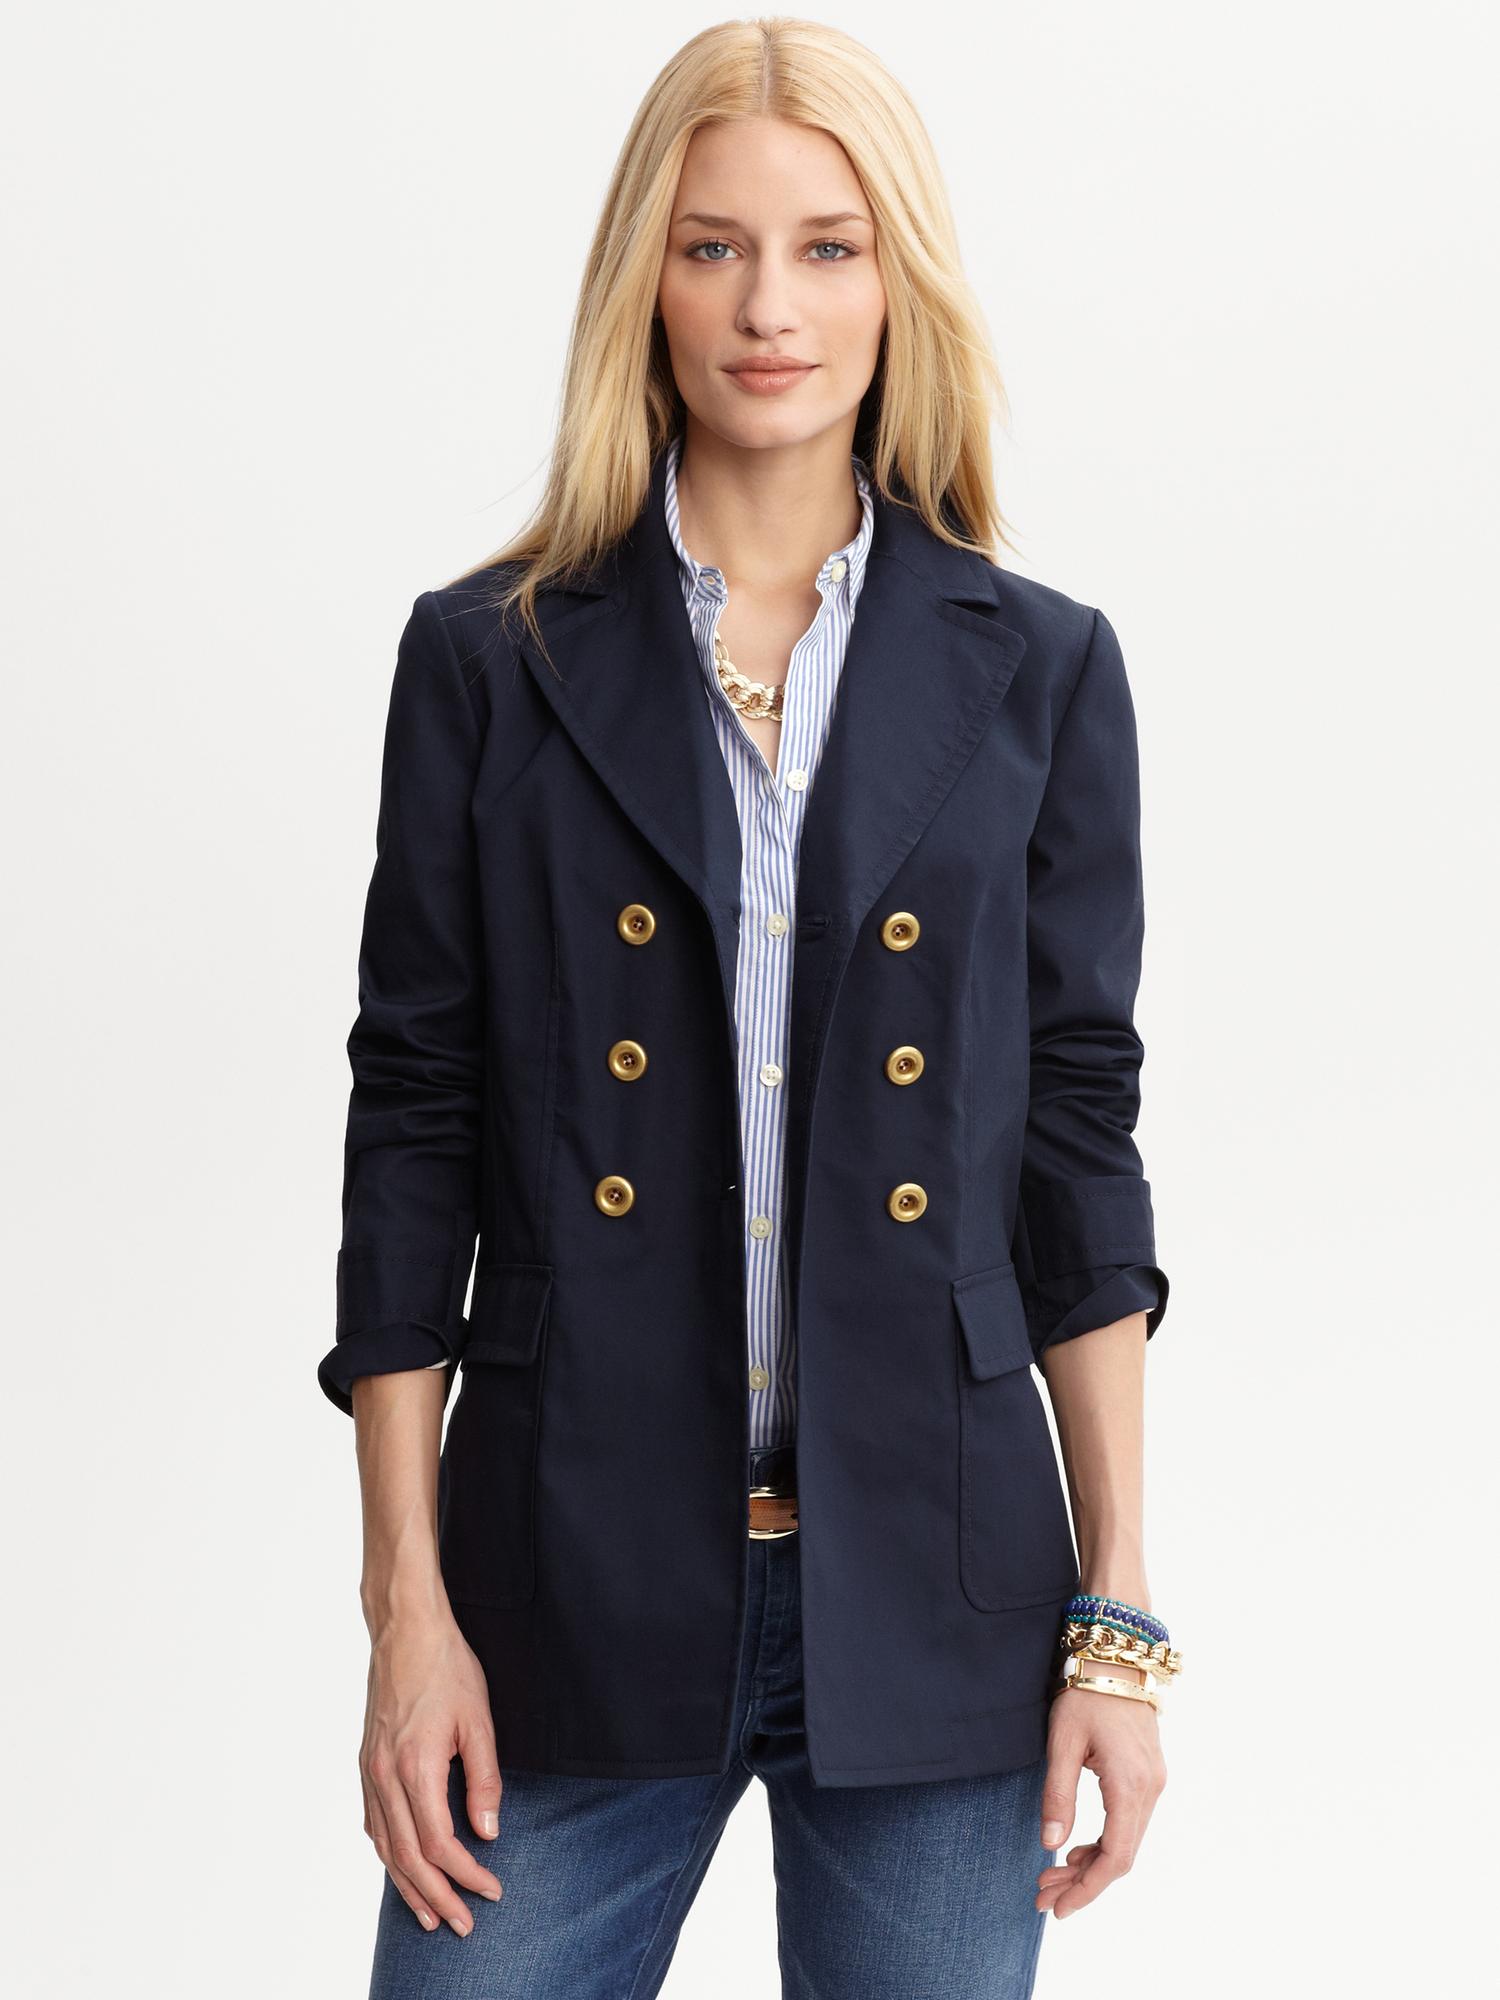 Navy double-breasted peacoat